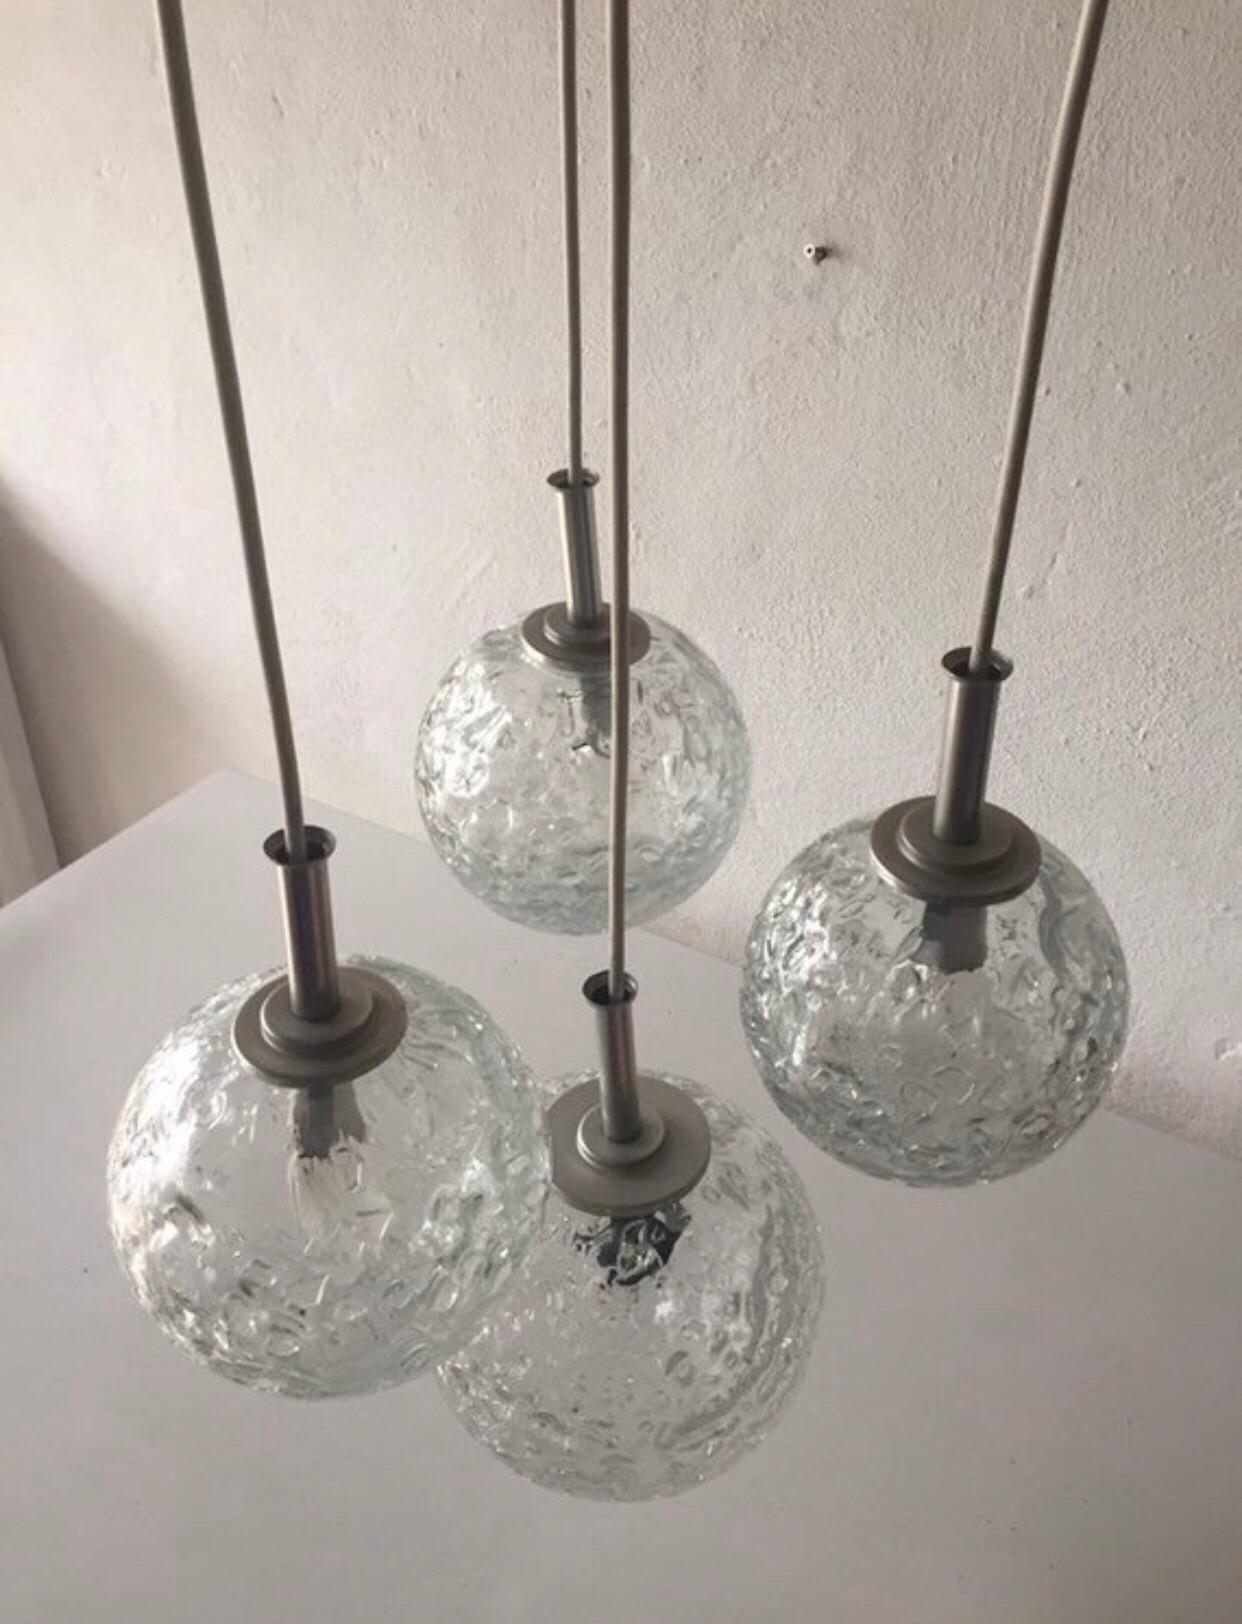 Brand: Doria Leuchten, 1970s, Germany
Made of 3 different sizes ball shaped glasses with matte grey metal tops.
The length of the lampshades can be set individually. The glass balls are structured.
Works with E27 type of bulbs.
 